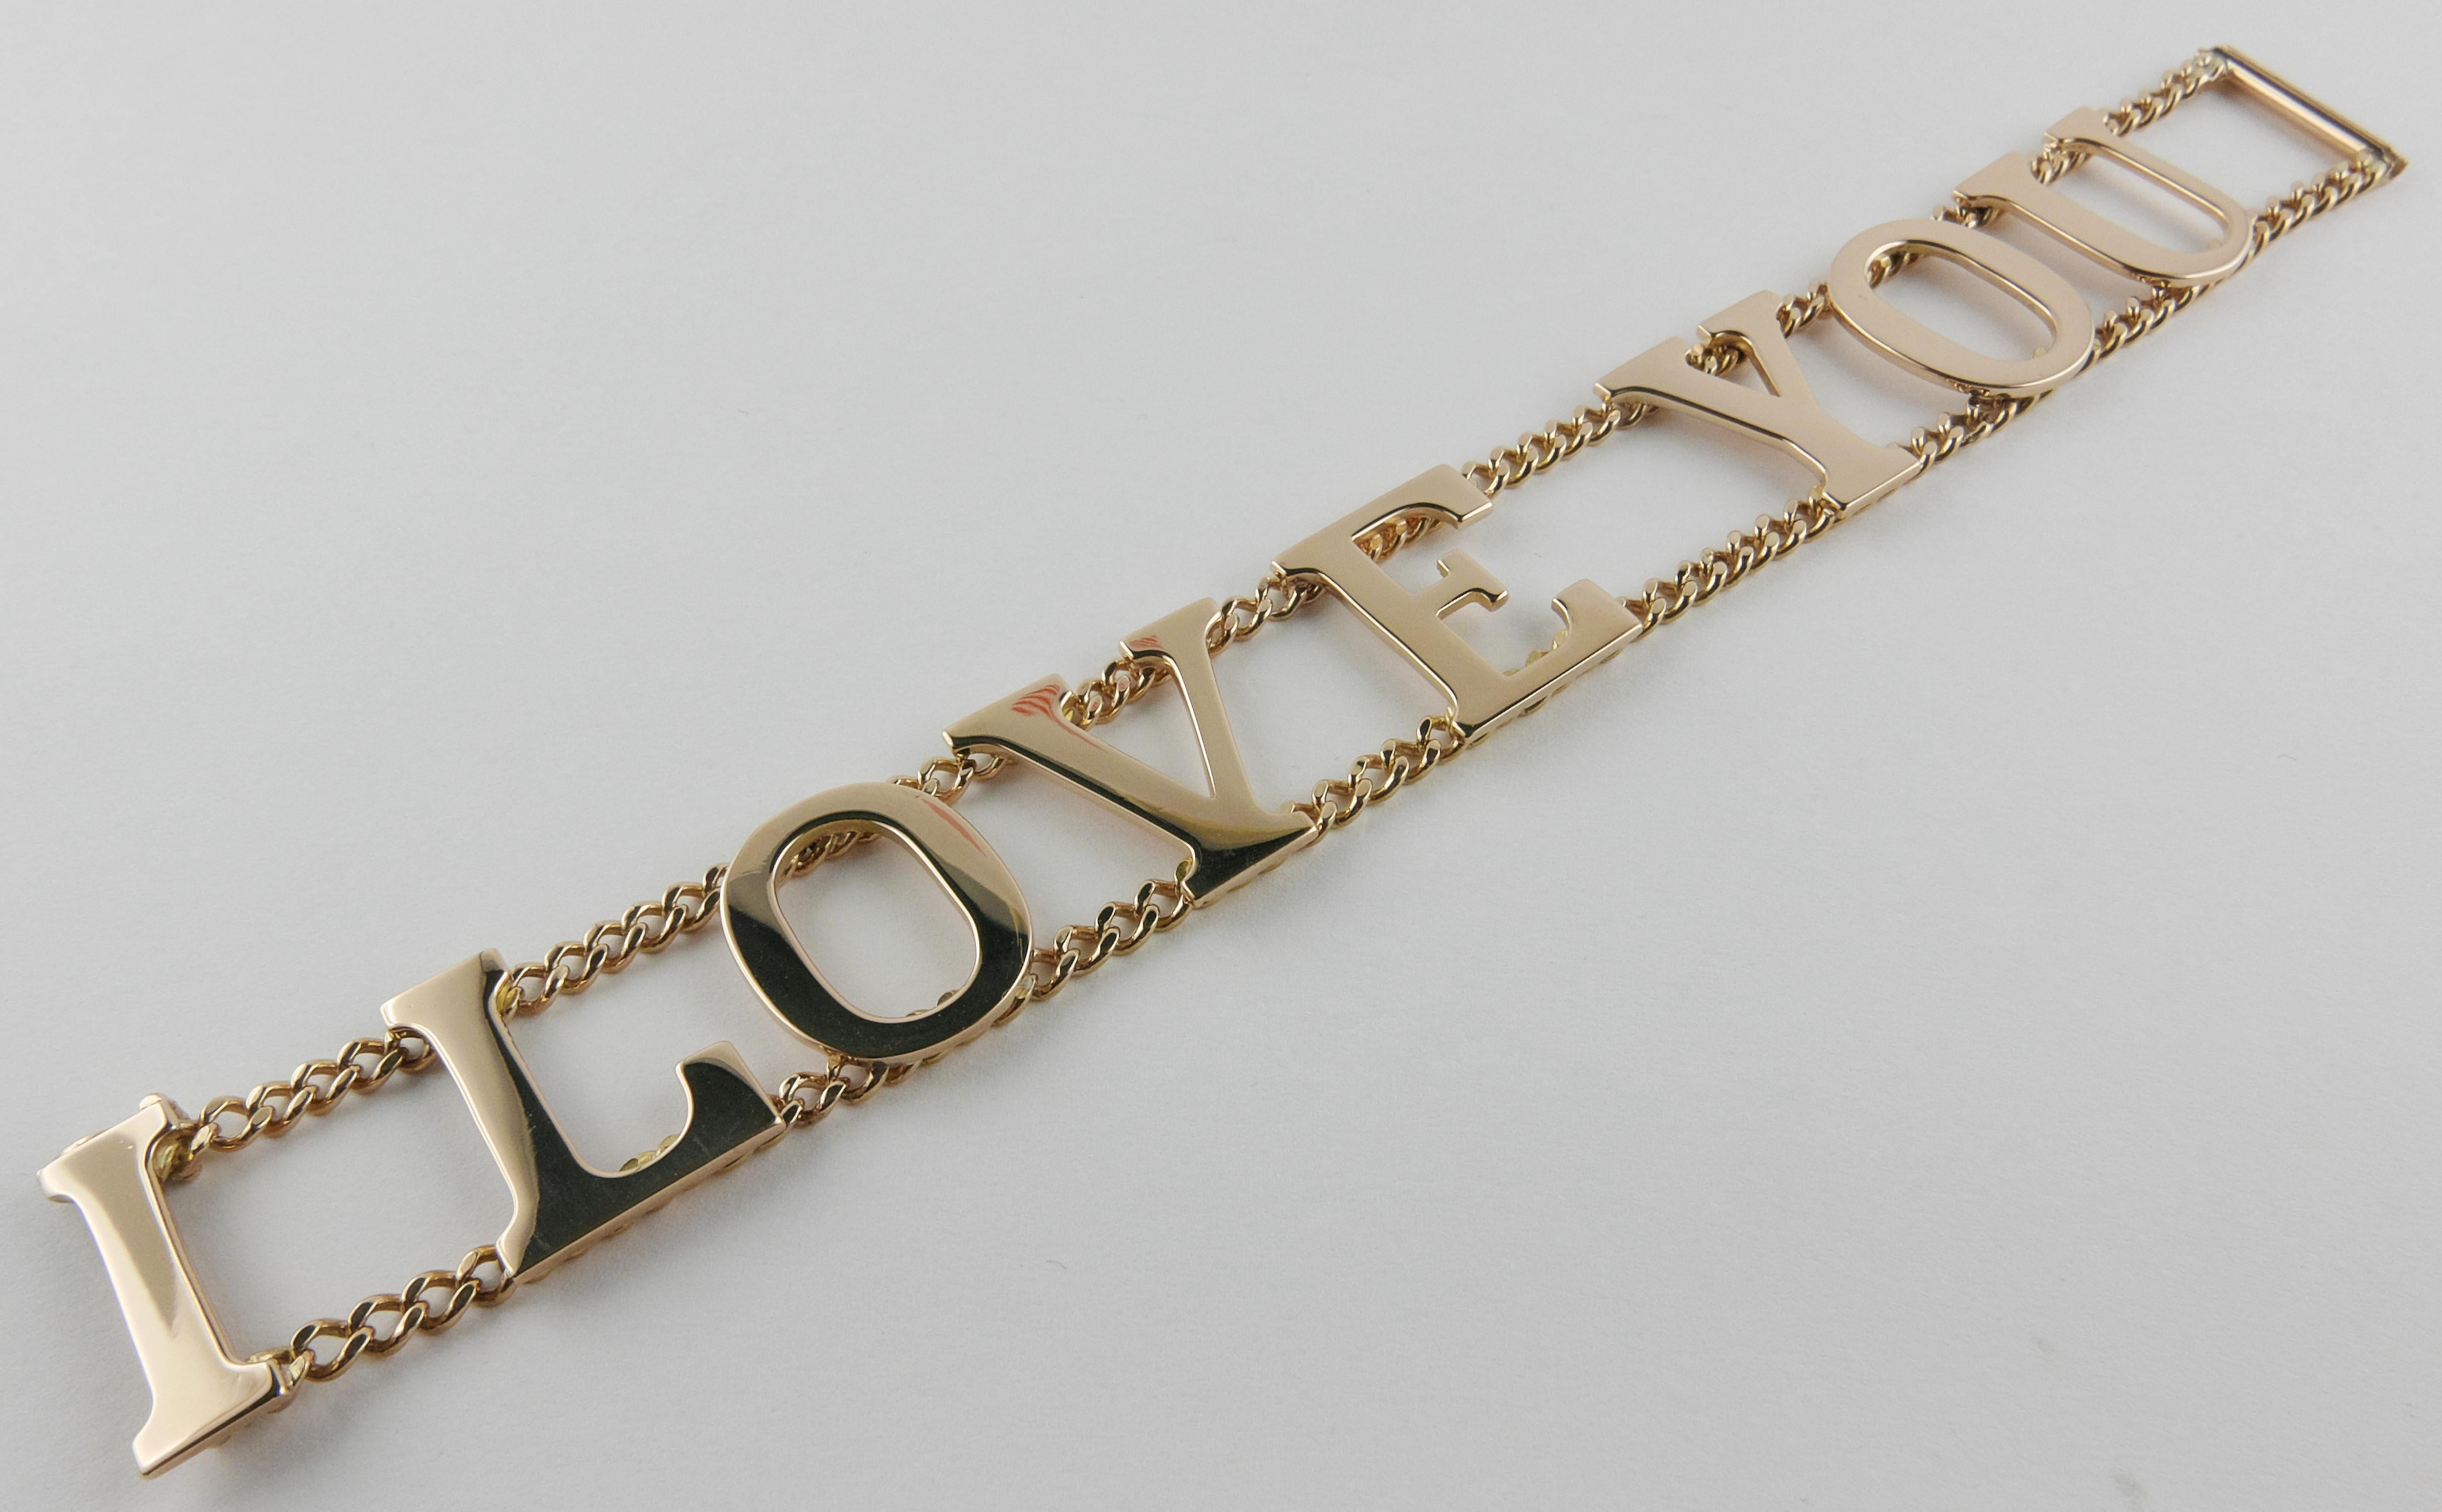 Italian Bracelet crafted with outstanding workmanship in the 1970s by the renowned roman jeweler Fürst, it is formed of a double gourmette chain in Yellow Gold and elements in the shape of letters aimed at composing the words 